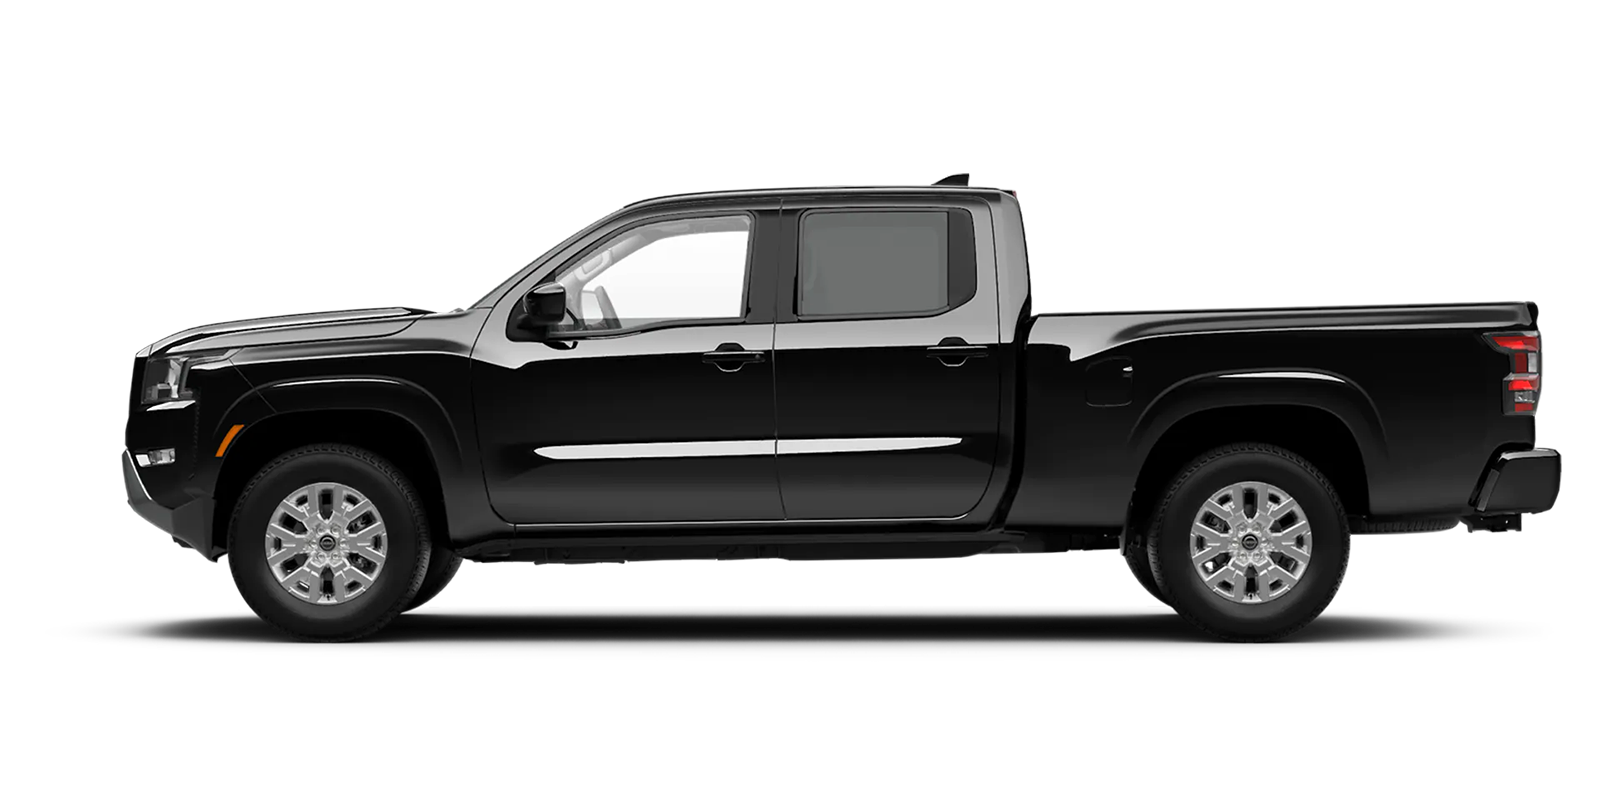 2022 Frontier Crew Cab Long Bed SV 4x2 in Super Black | Wallace Nissan of Kingsport in Kingsport TN